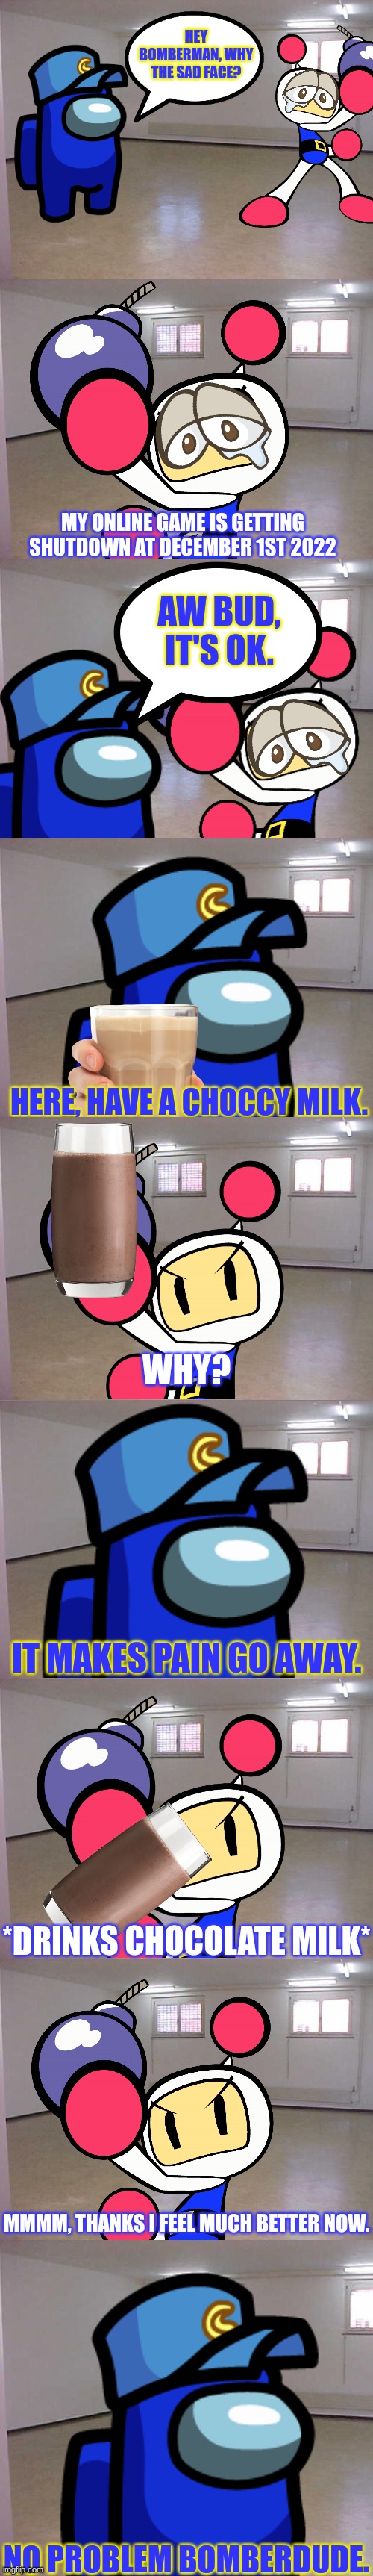 Cam cheers up Bomberman with Choccy Milk | NO PROBLEM BOMBERDUDE. | image tagged in bomberman,choccy milk,ocs,crossover,chocolate milk,milk | made w/ Imgflip meme maker